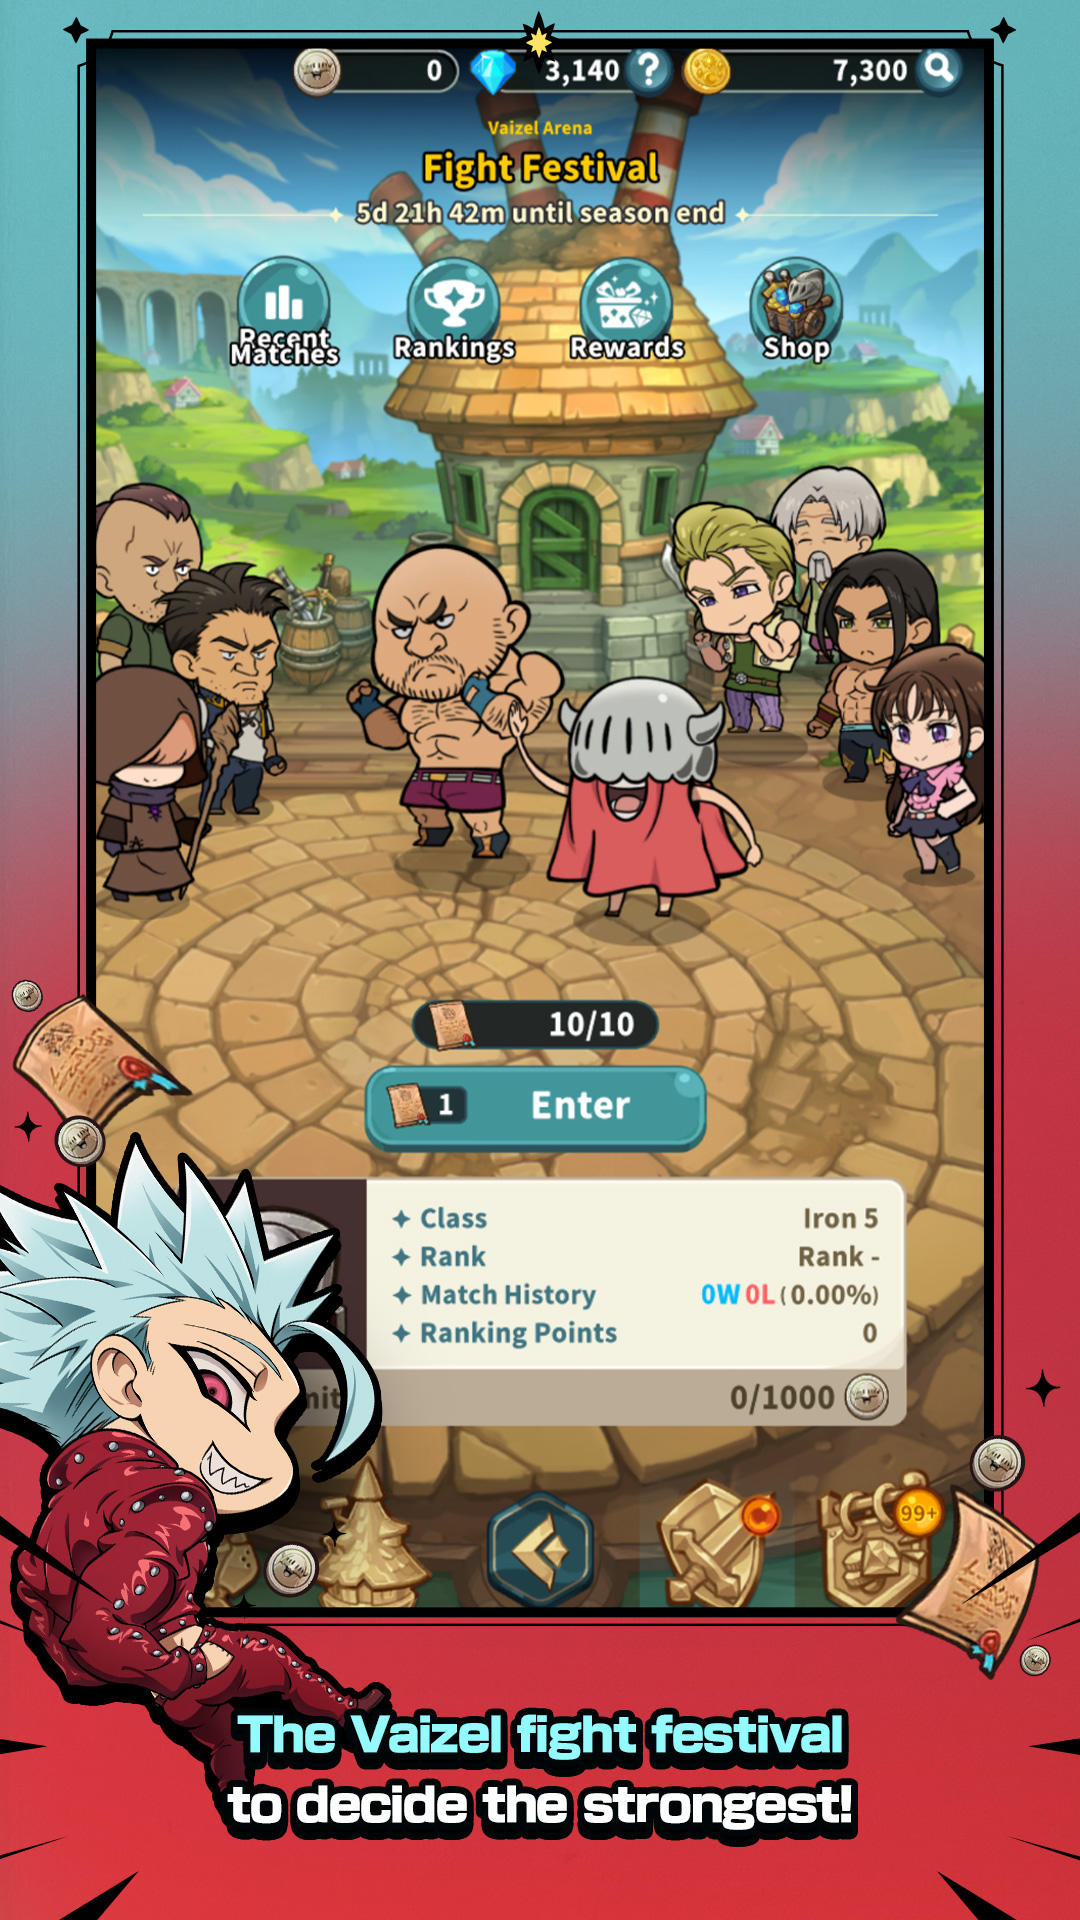 Screenshot of The Seven Deadly Sins: Idle